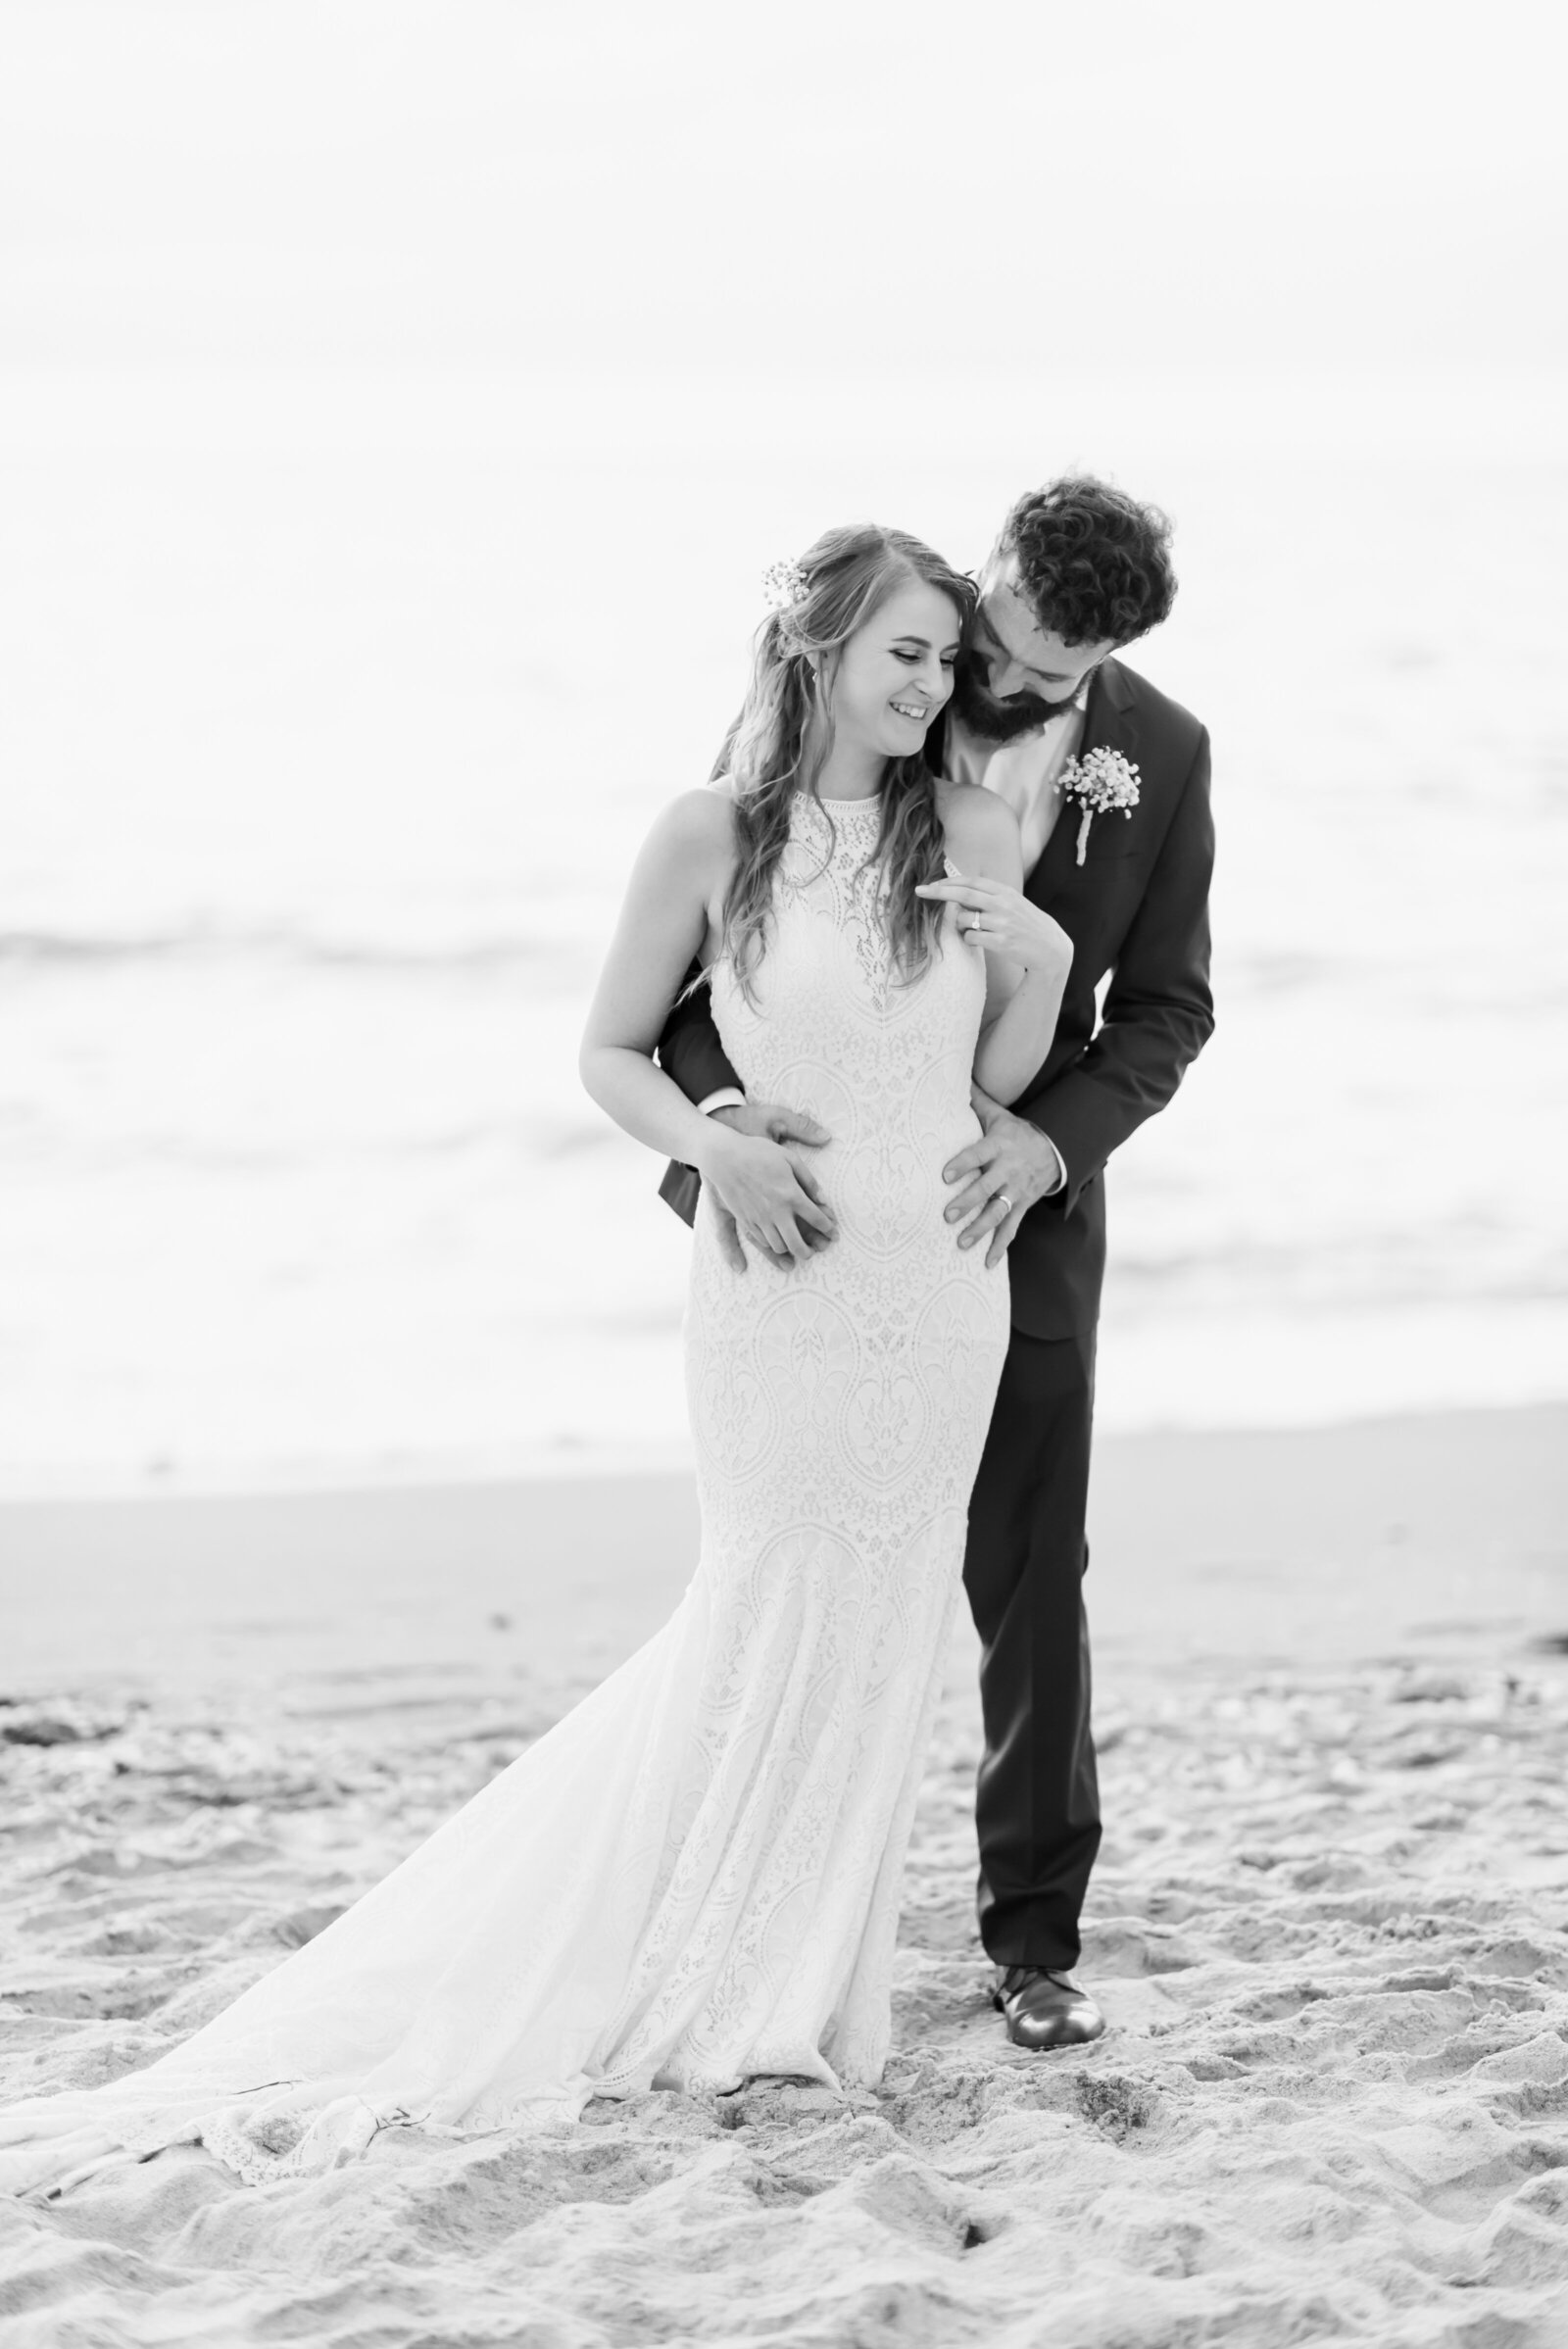 black and white photograph of bride and groom on the beach. She is standing in front of him and he is leaning in to kiss her cheek